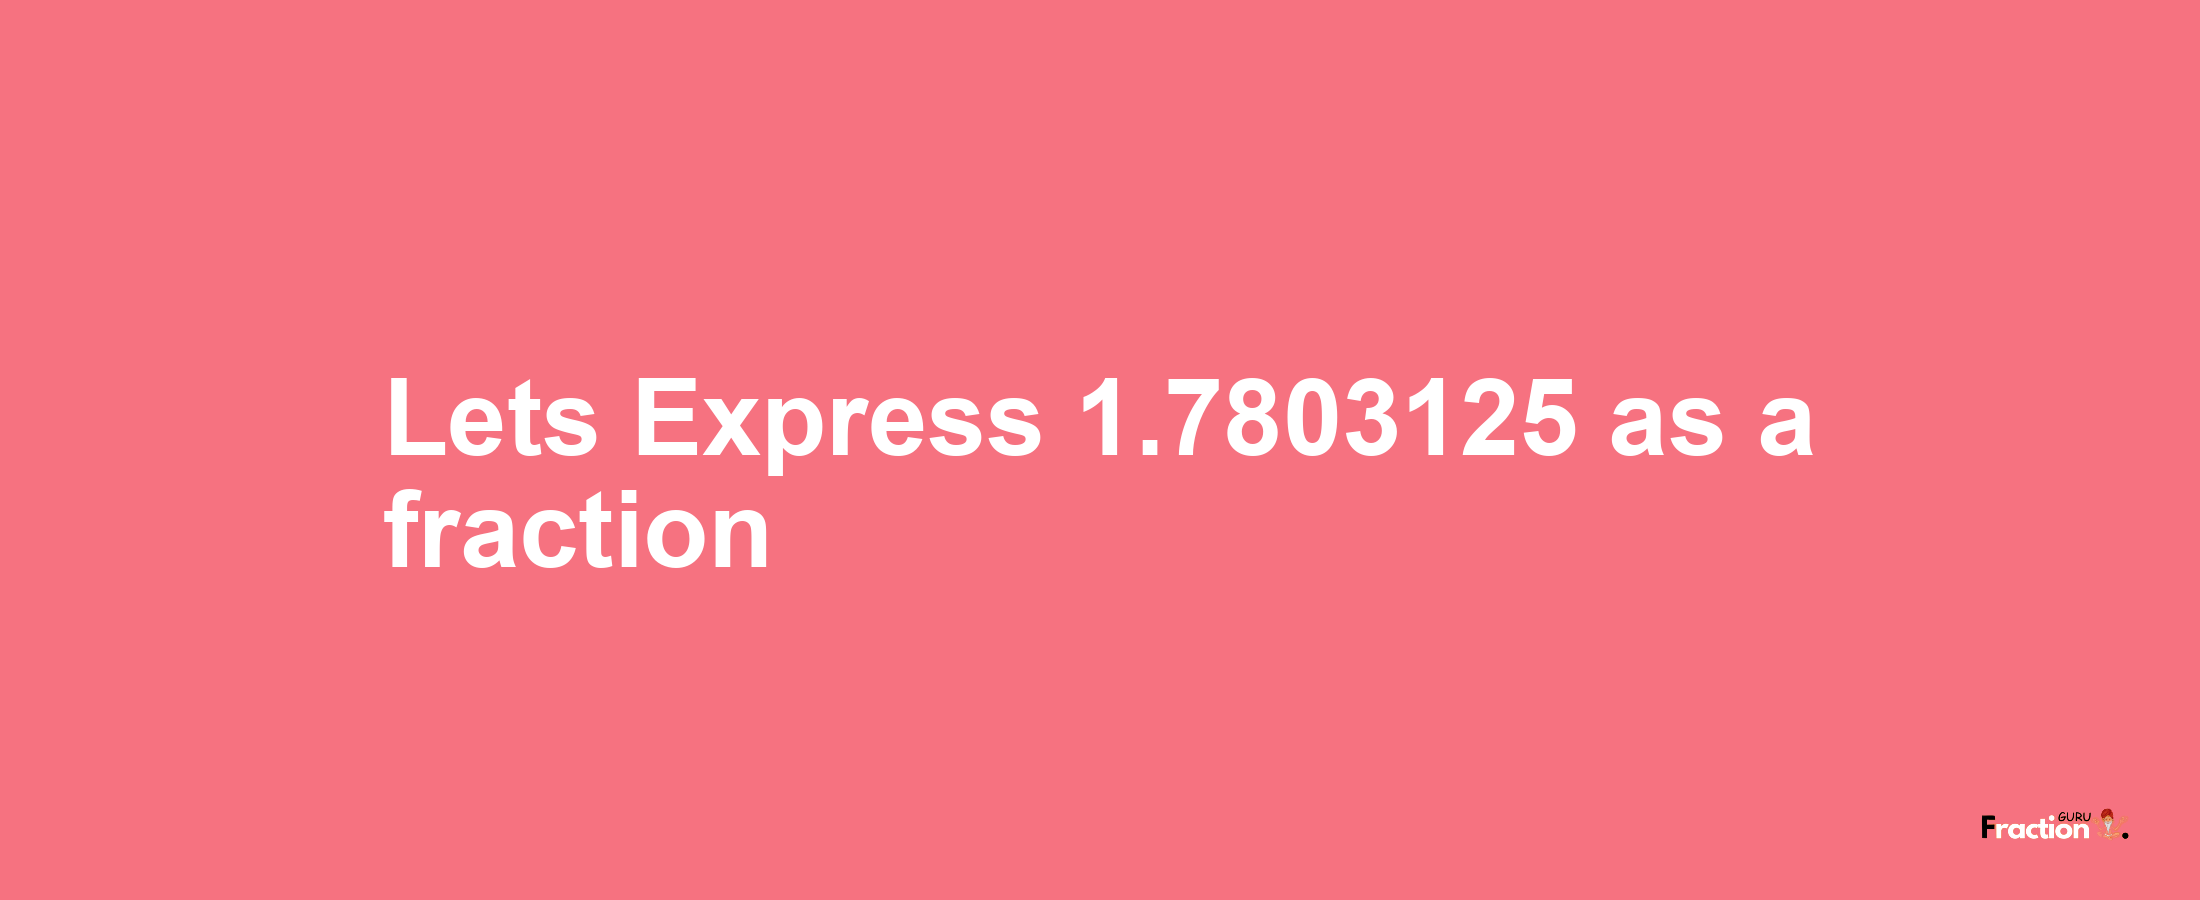 Lets Express 1.7803125 as afraction